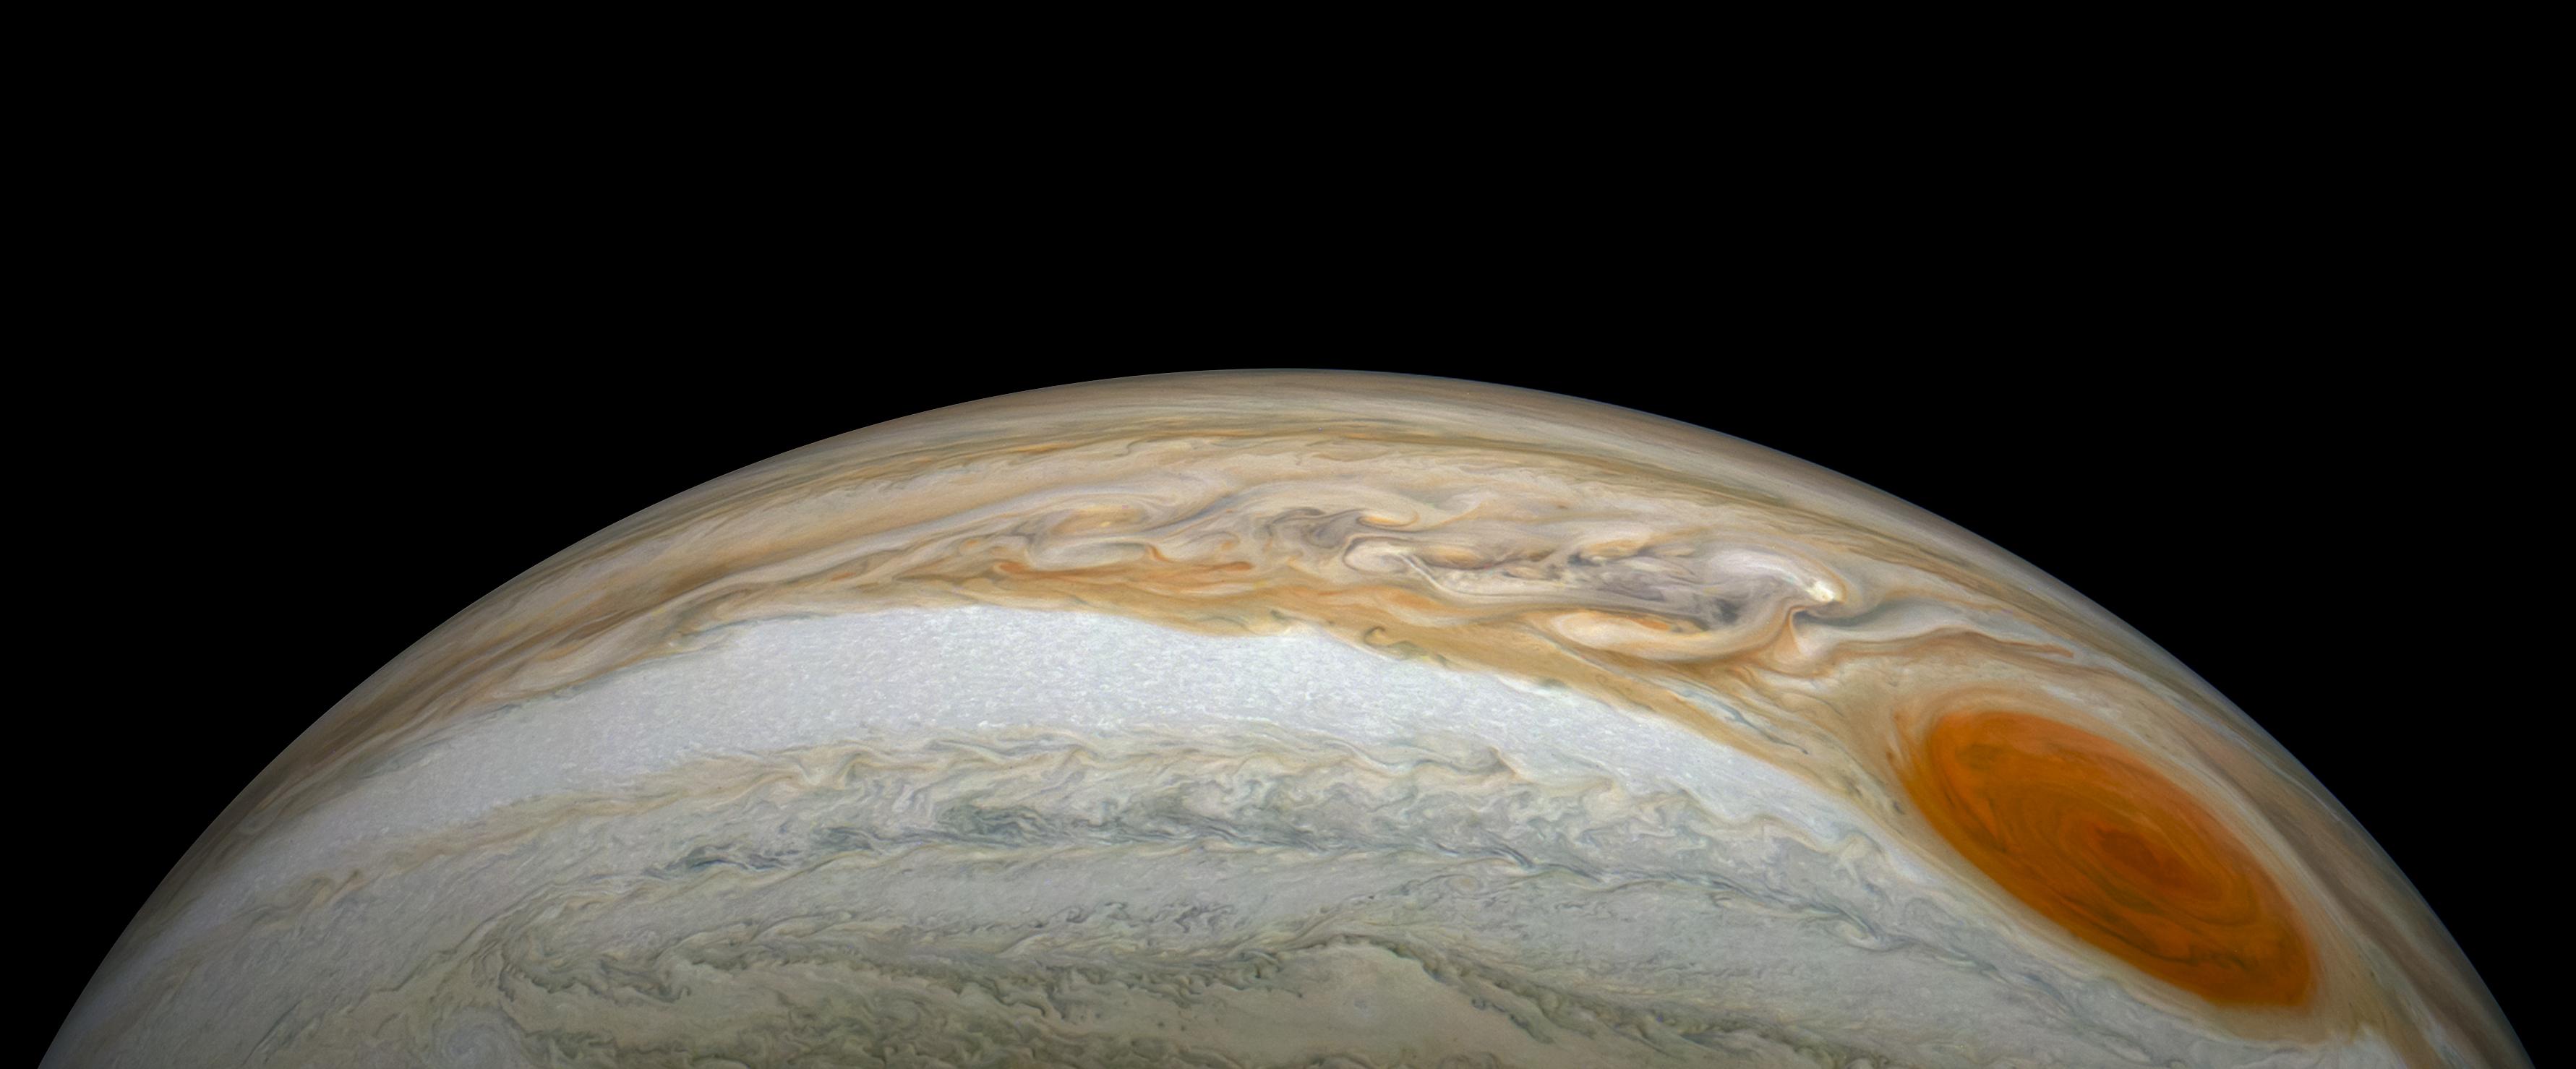 Another look at Jupiter’s Great Red Spot, courtesy of Juno ...